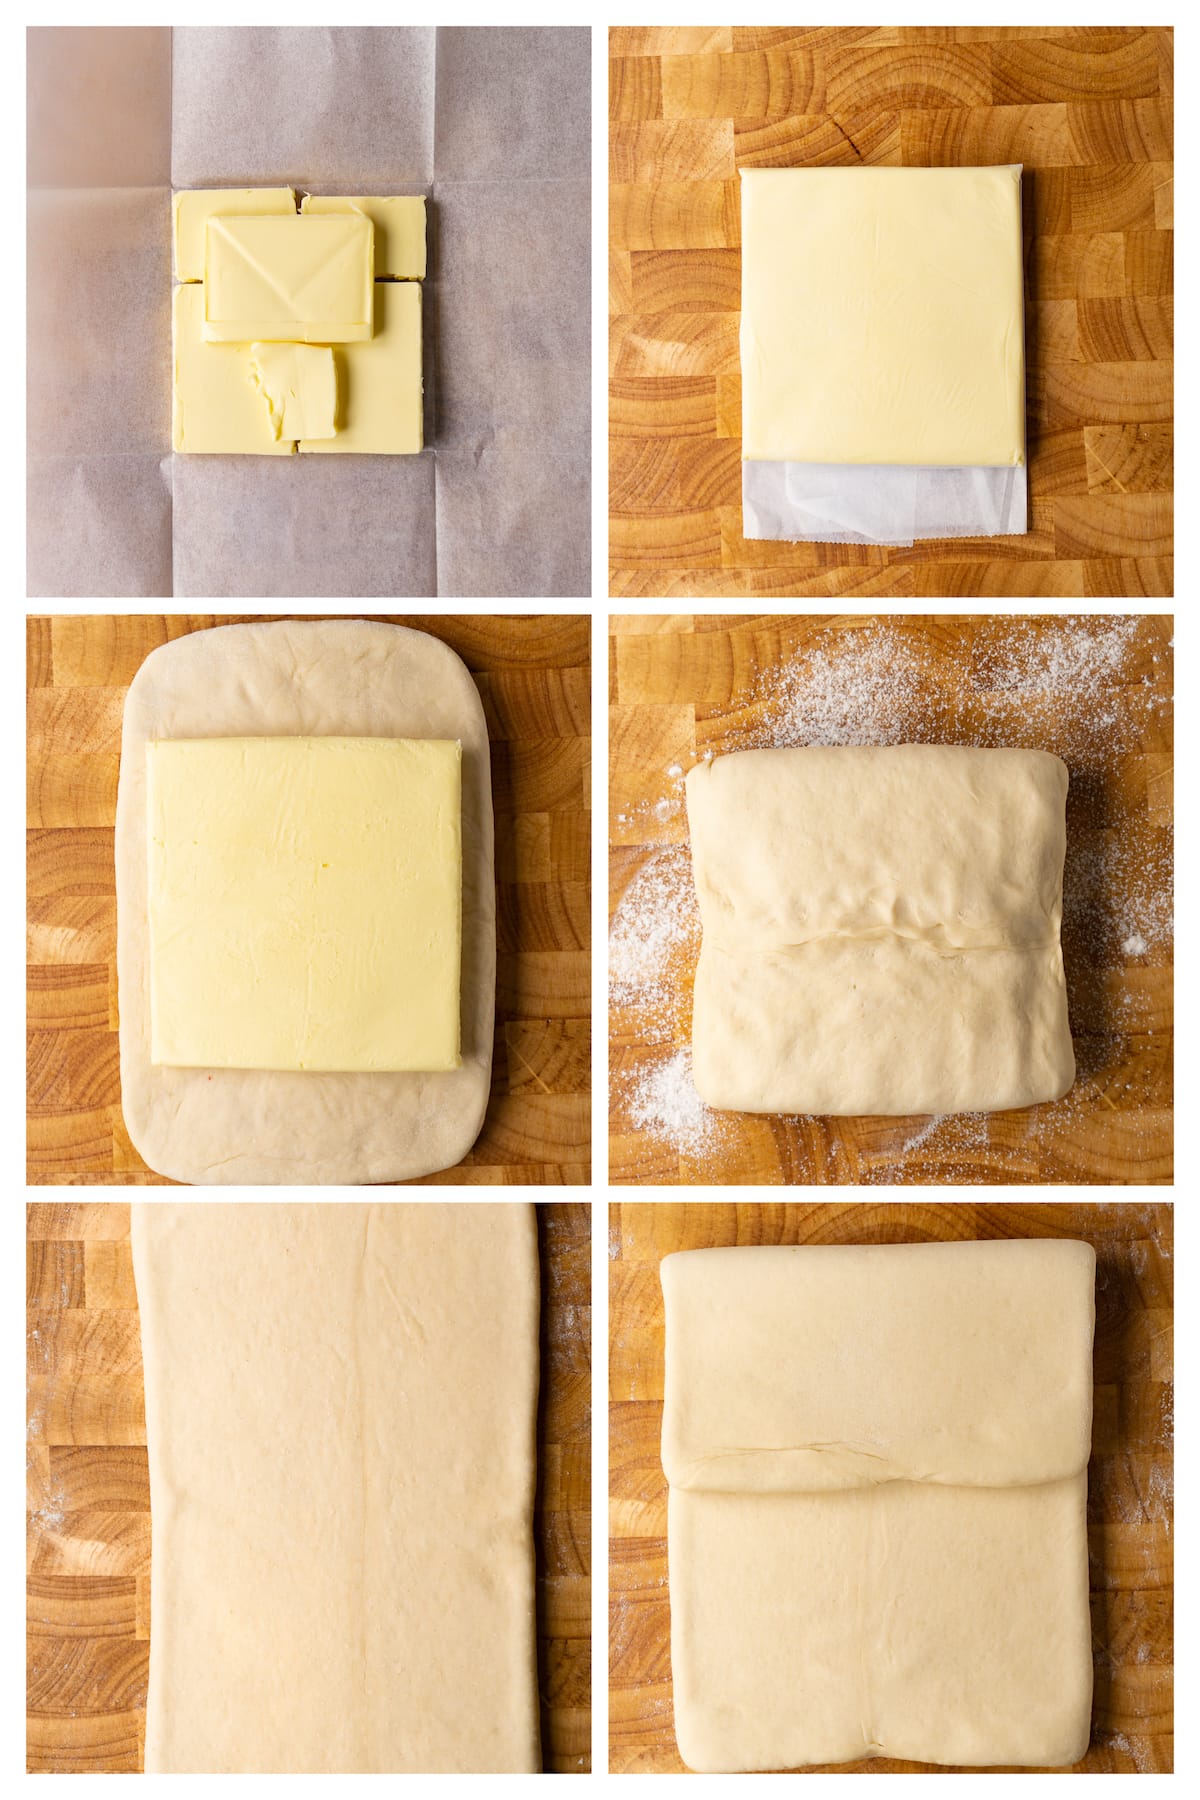 The collage image shows six steps to laminating a butter block into the croissant dough.